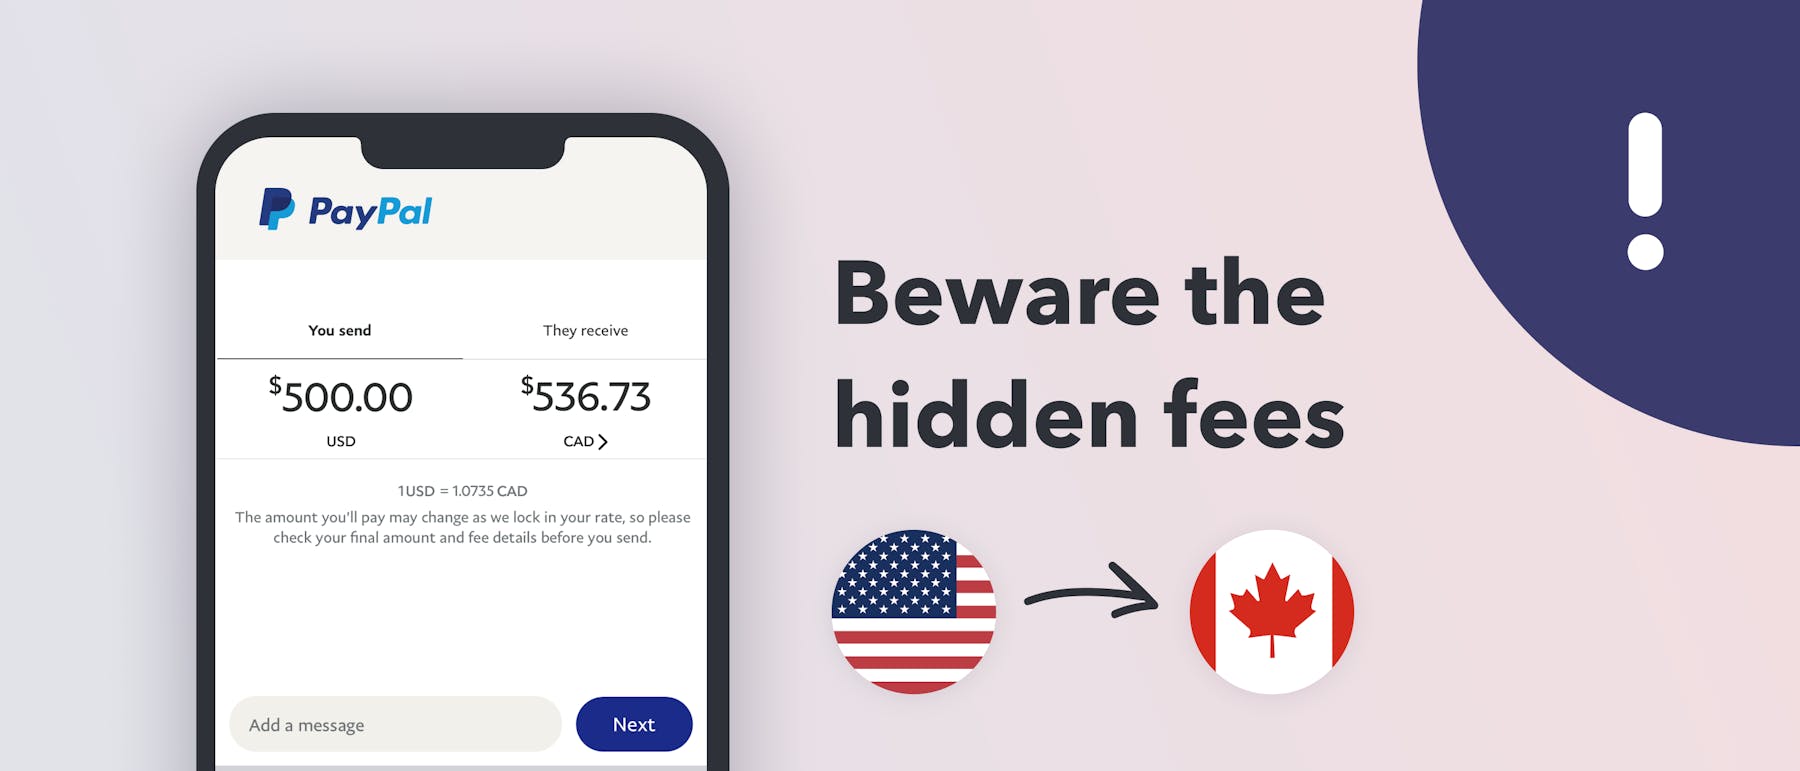 Sending PayPal From the US to Canada? Beware the Fees